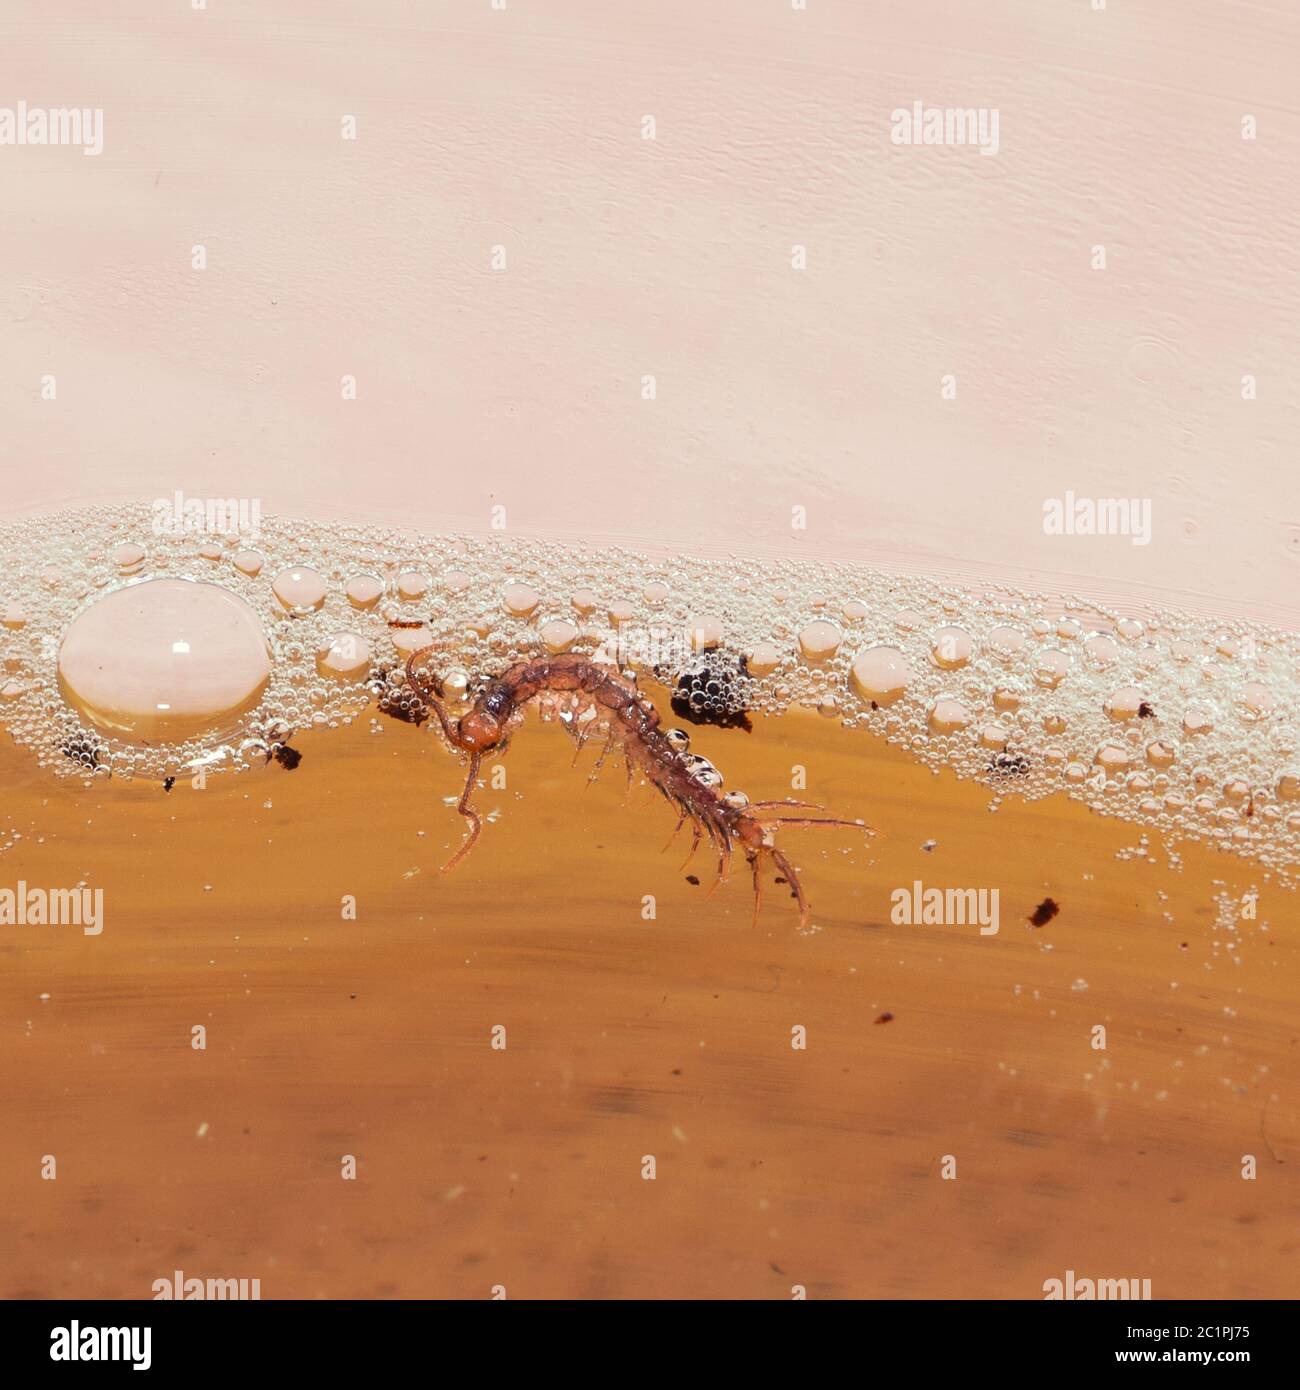 Centipede in the water. Stock Photo